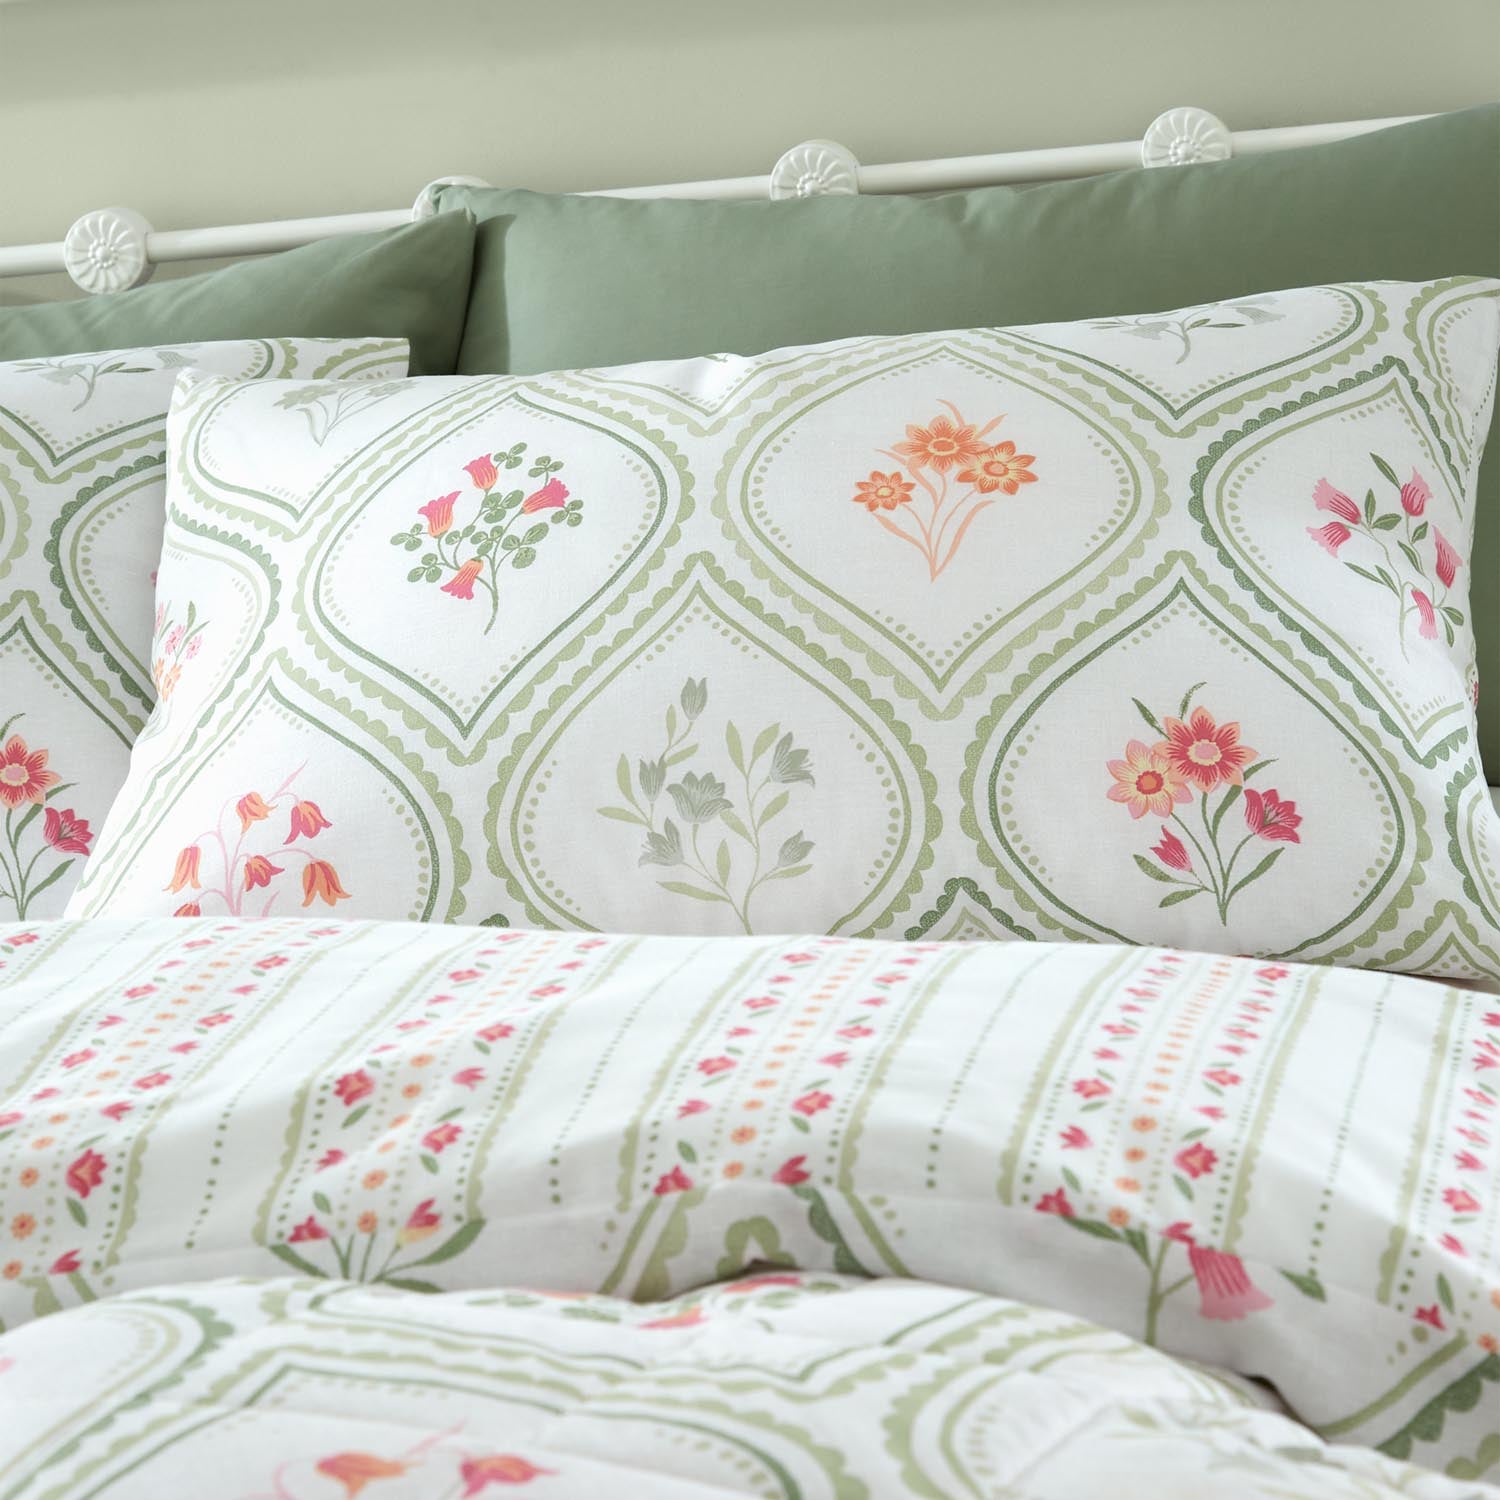 The Home Luxury Collection Trellis Floral Duvet Cover Set 3 Shaws Department Stores